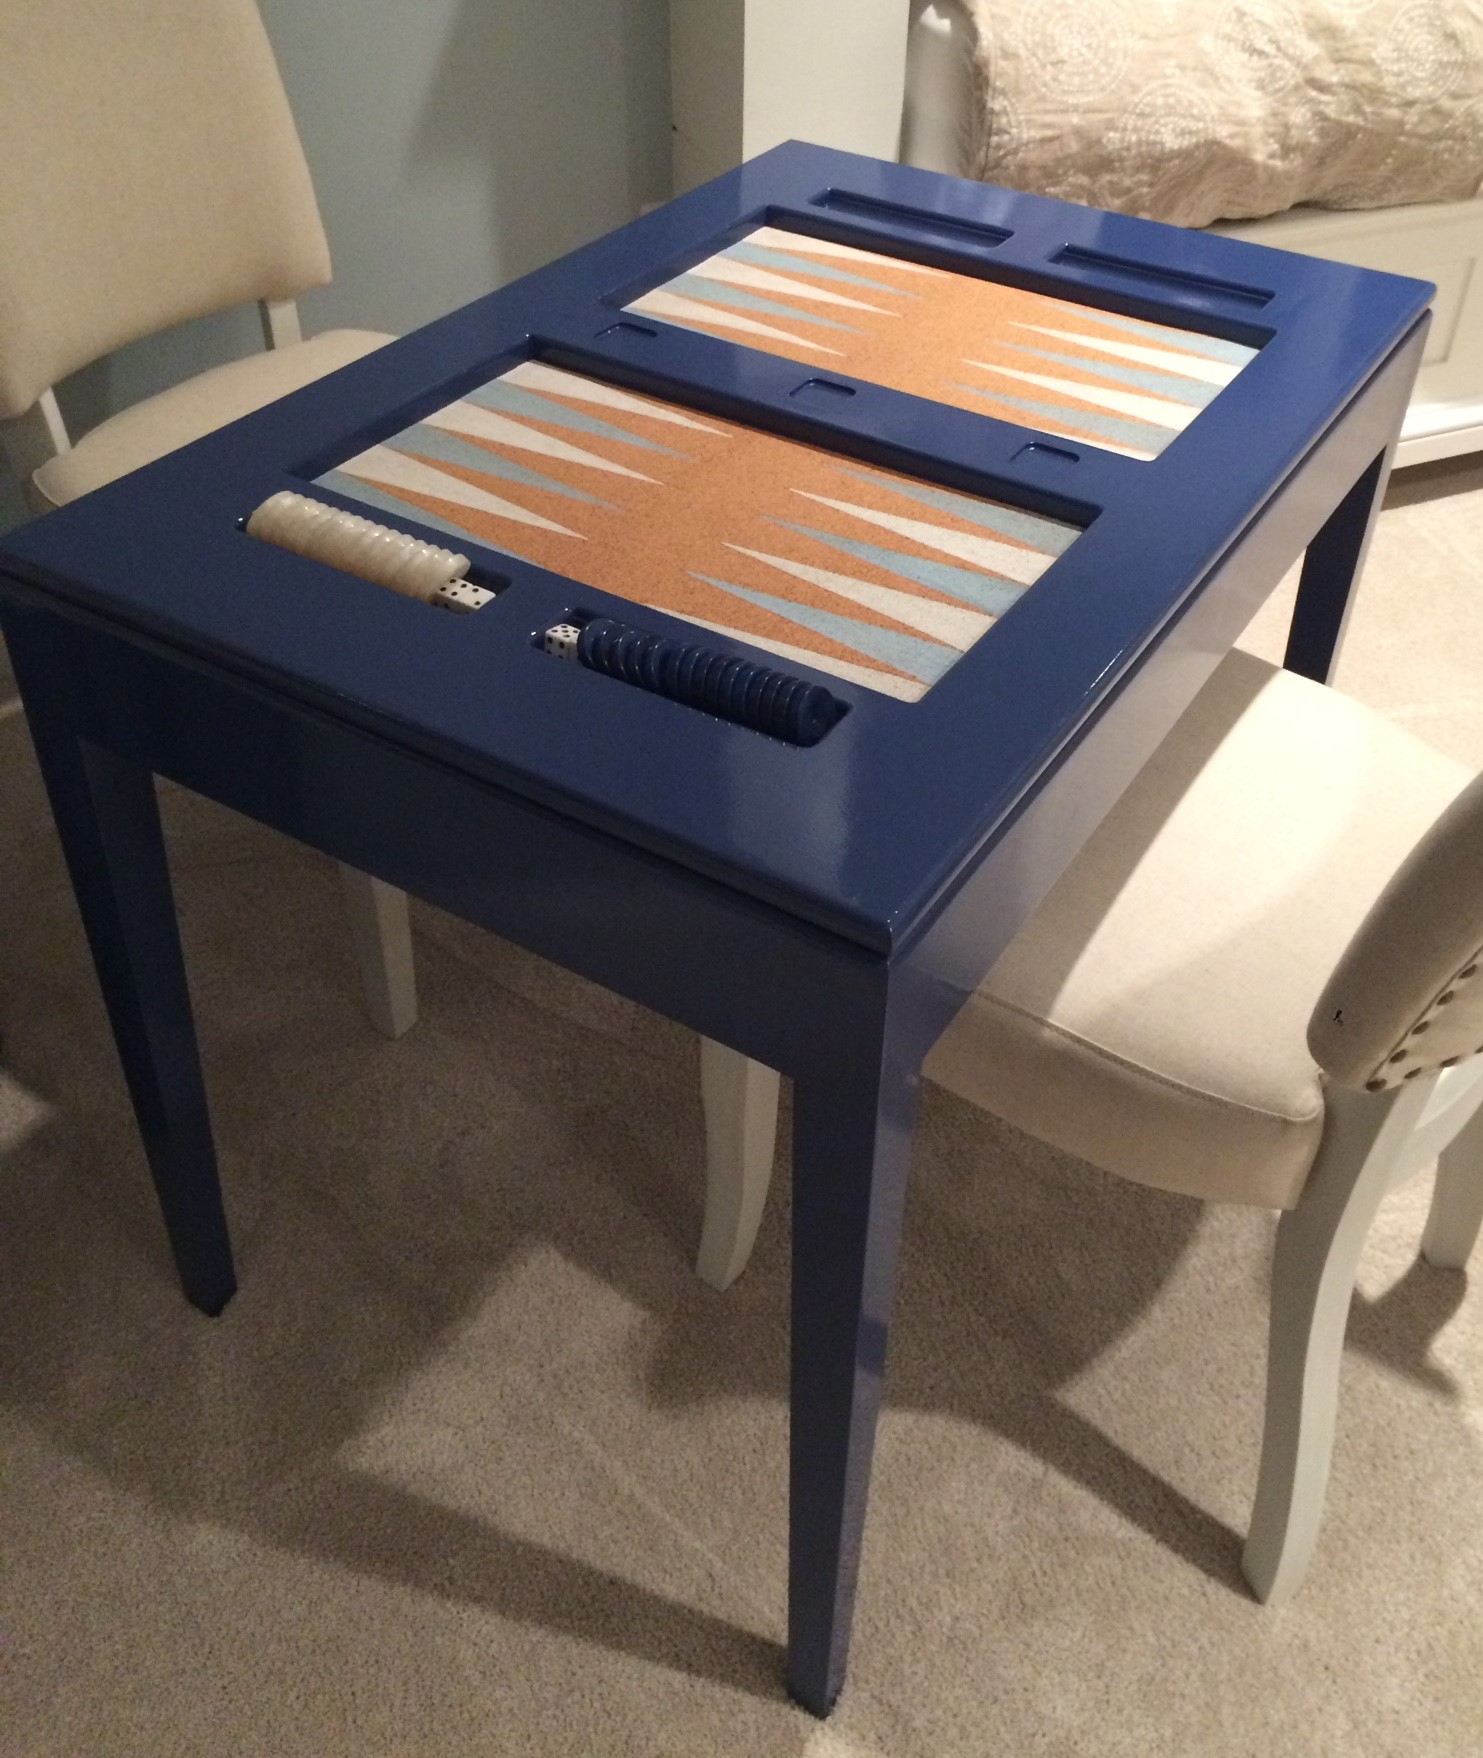 Game table for backgammon